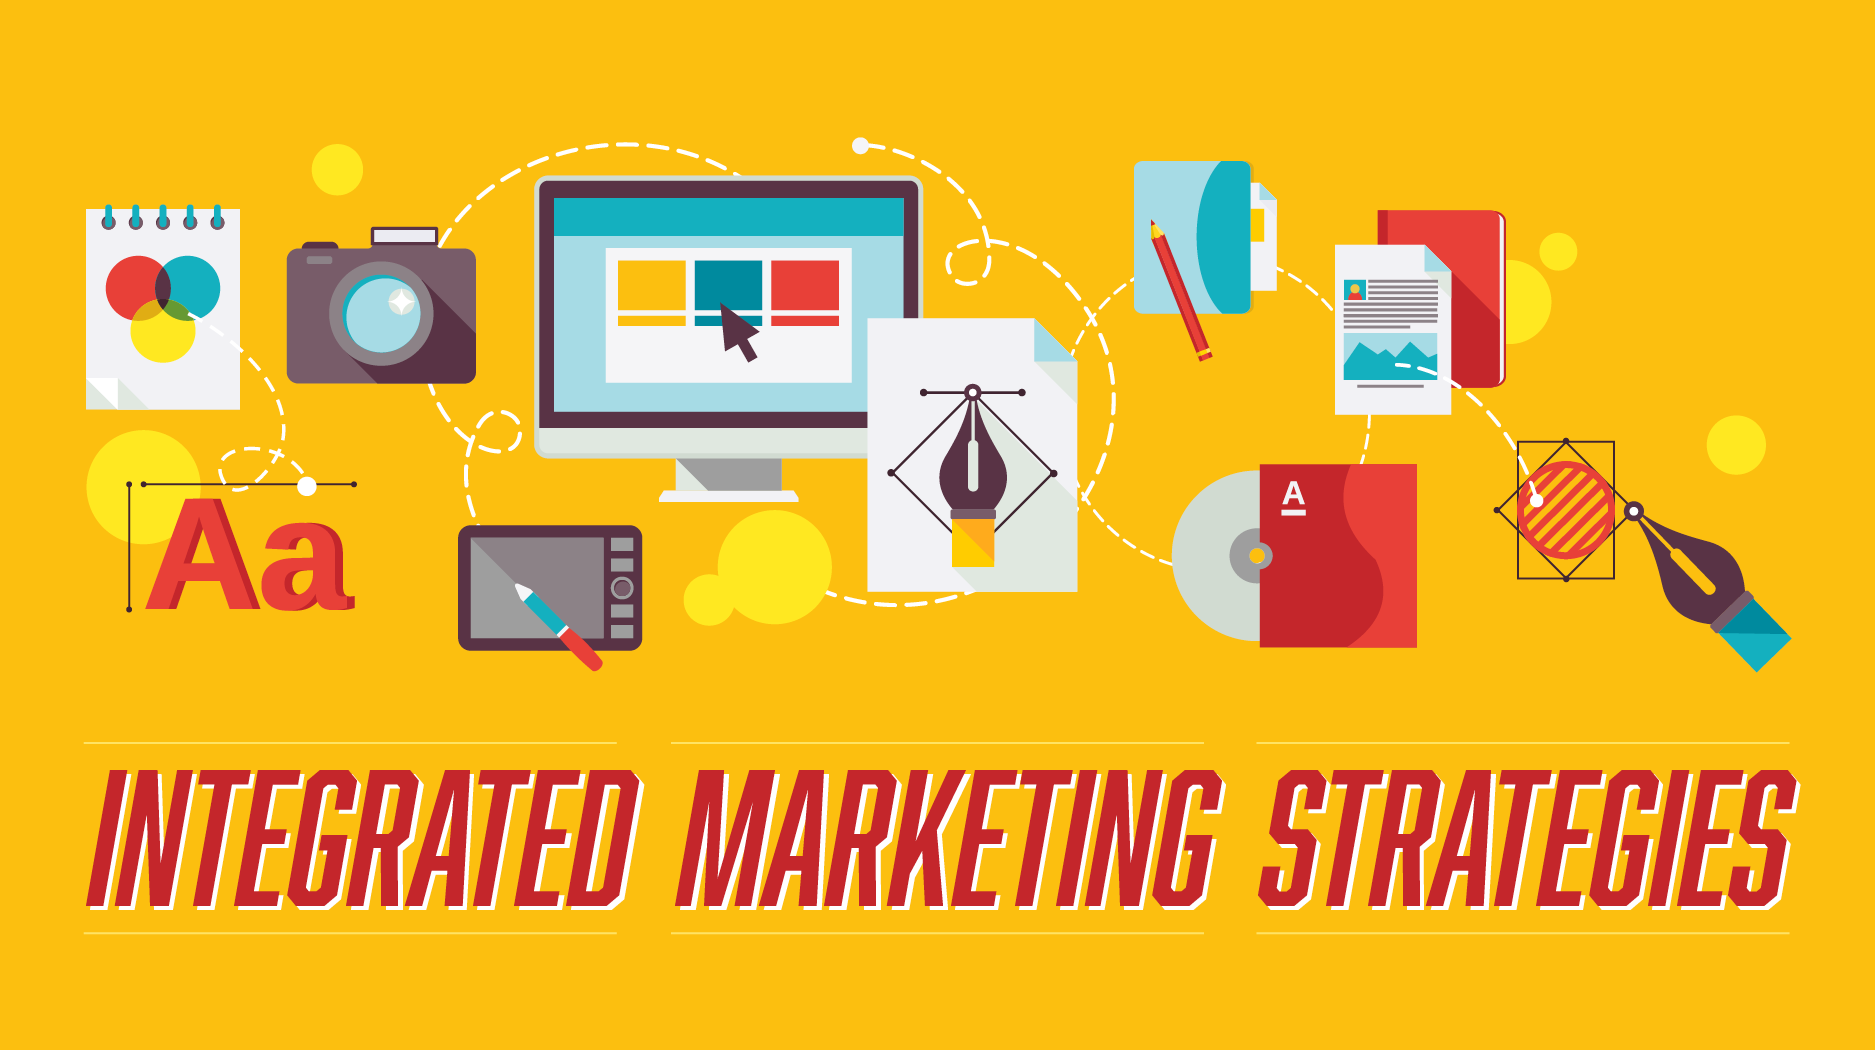 4 Steps to Integrated Marketing Strategies 